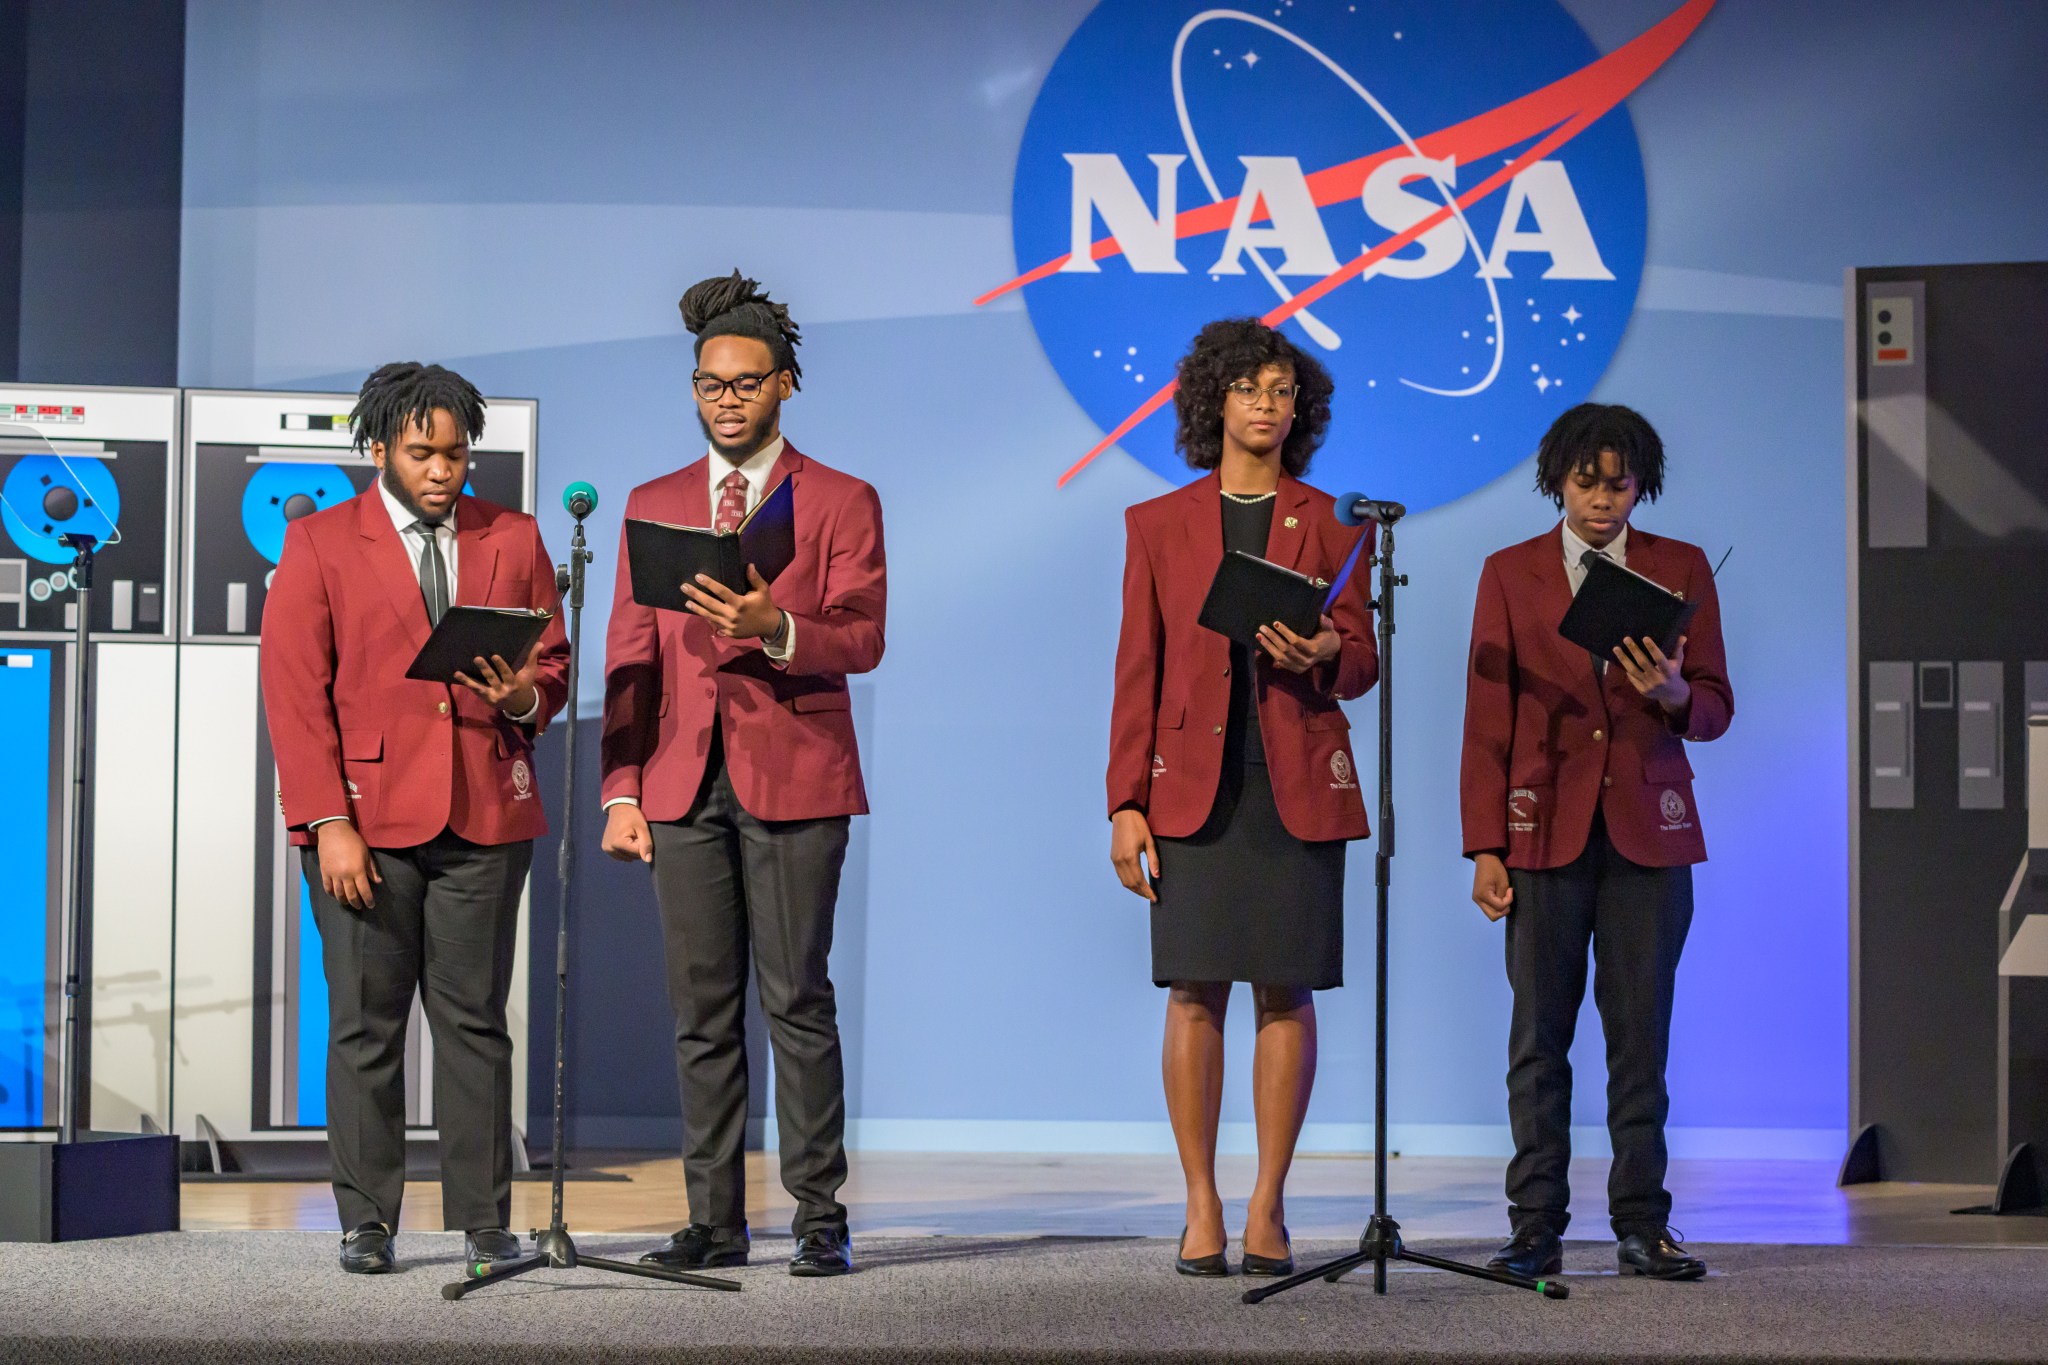 Four young people stand on a stage in front of a large NASA logo. They are dressed in matching maroon blazers and are holding black folders.The backdrop features large images of tape reels and computer equipment.